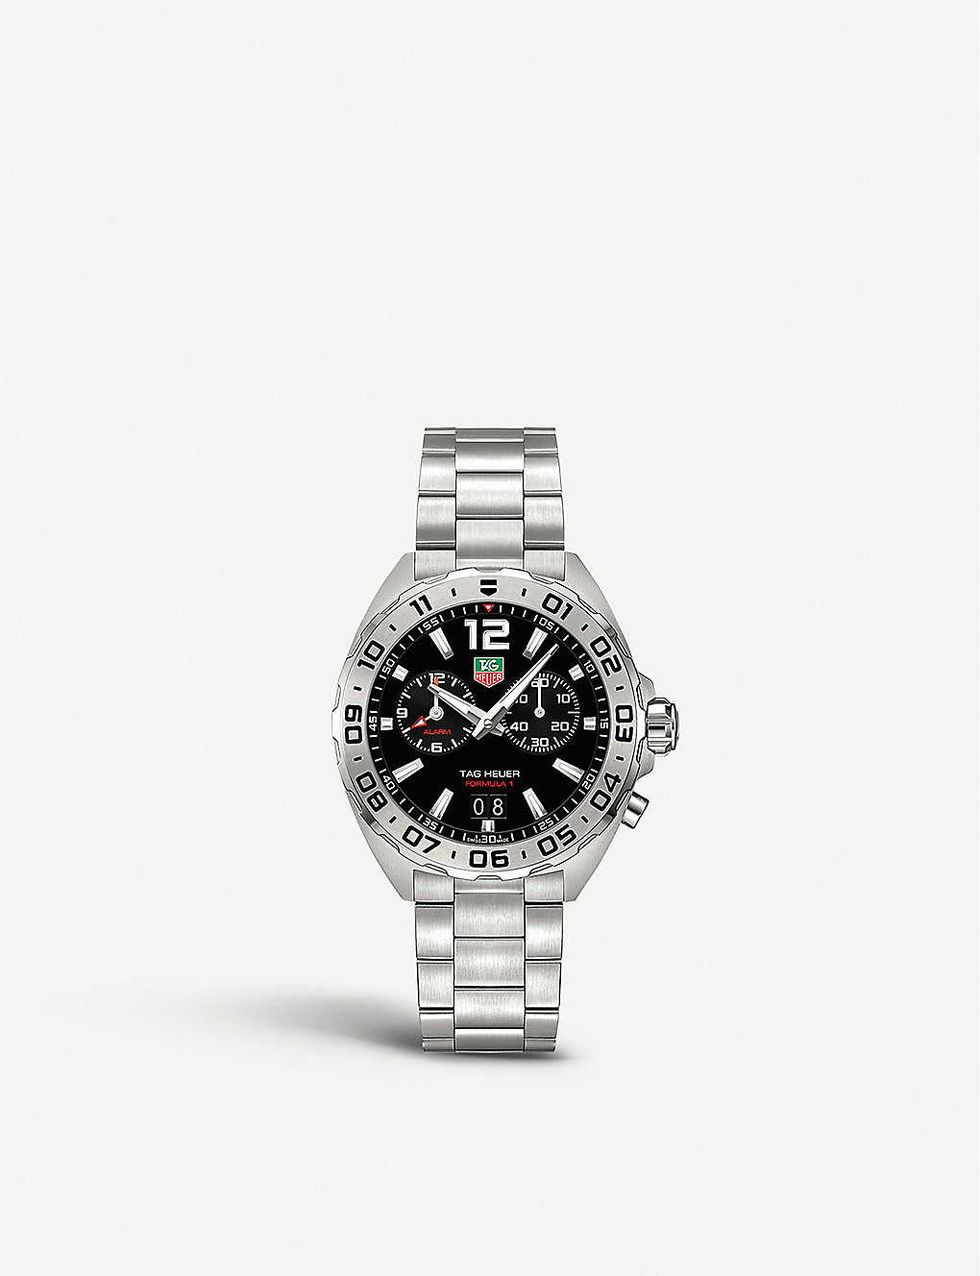 Formula 1 stainless steel watch